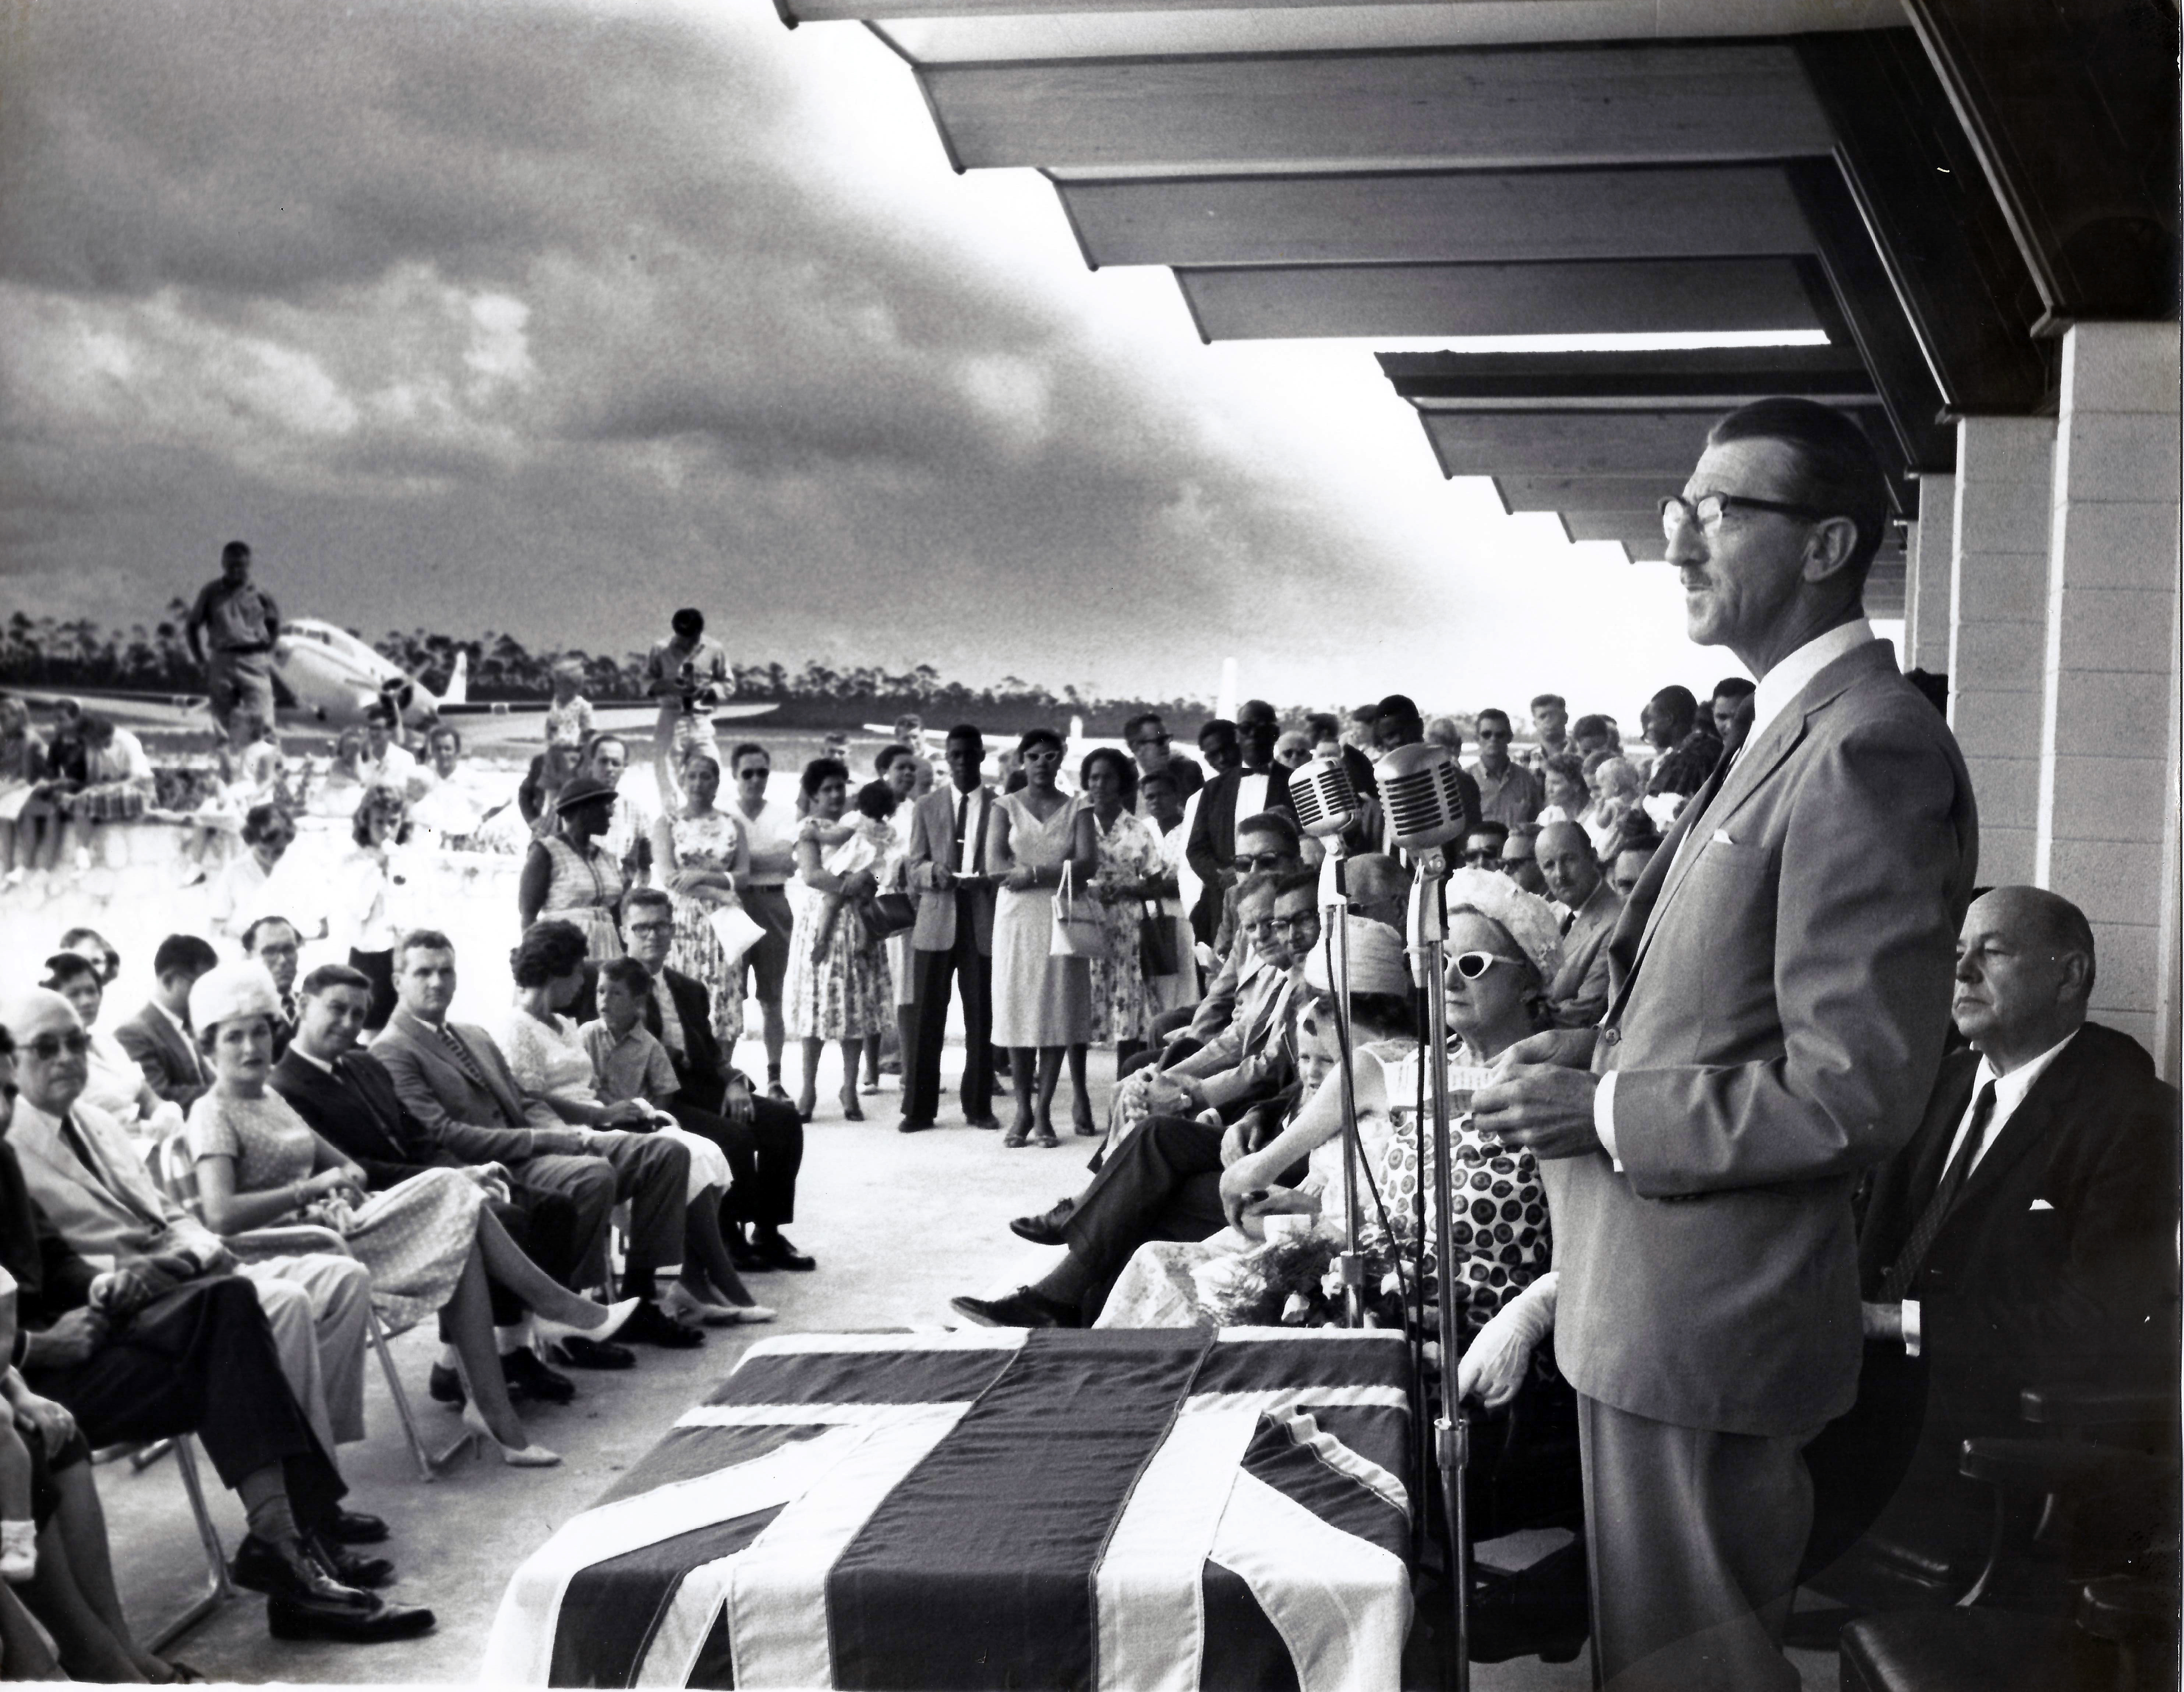 Lord Ranfurly speaking at the dedication of the Freeport Airport